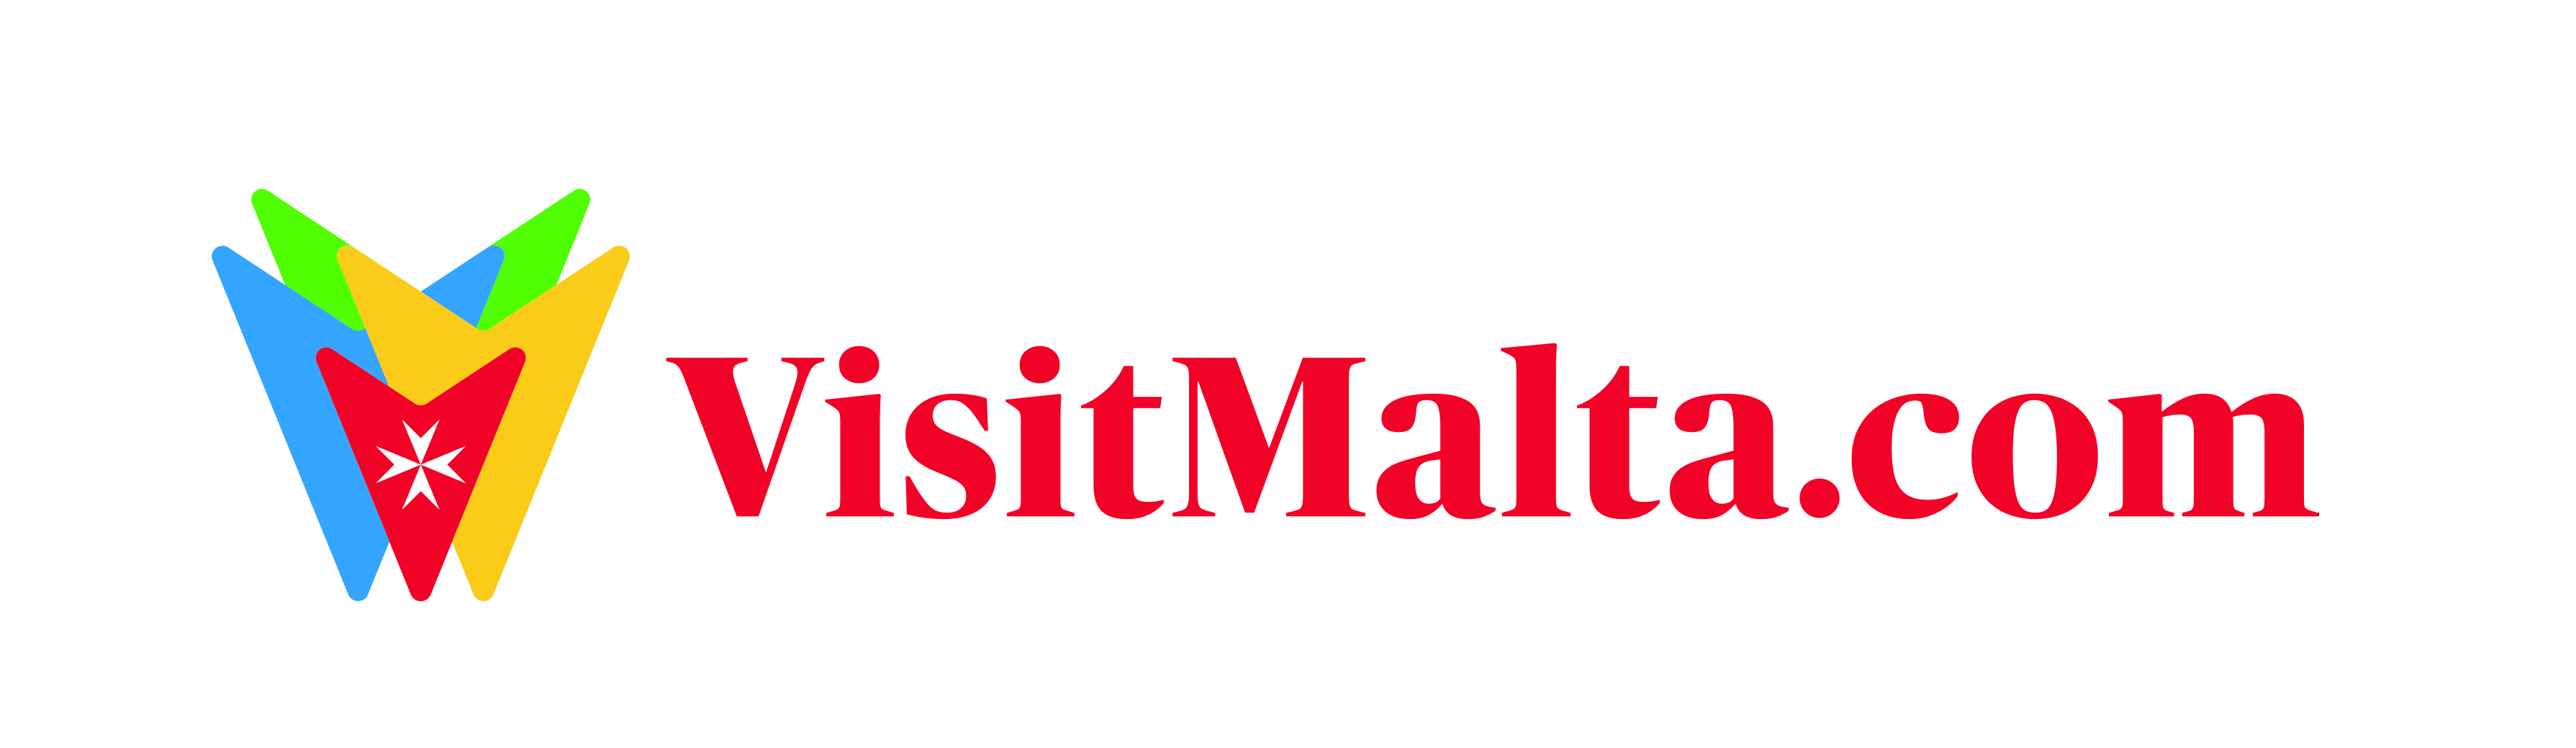 Website Promotes Malta tourism for people with disabilities